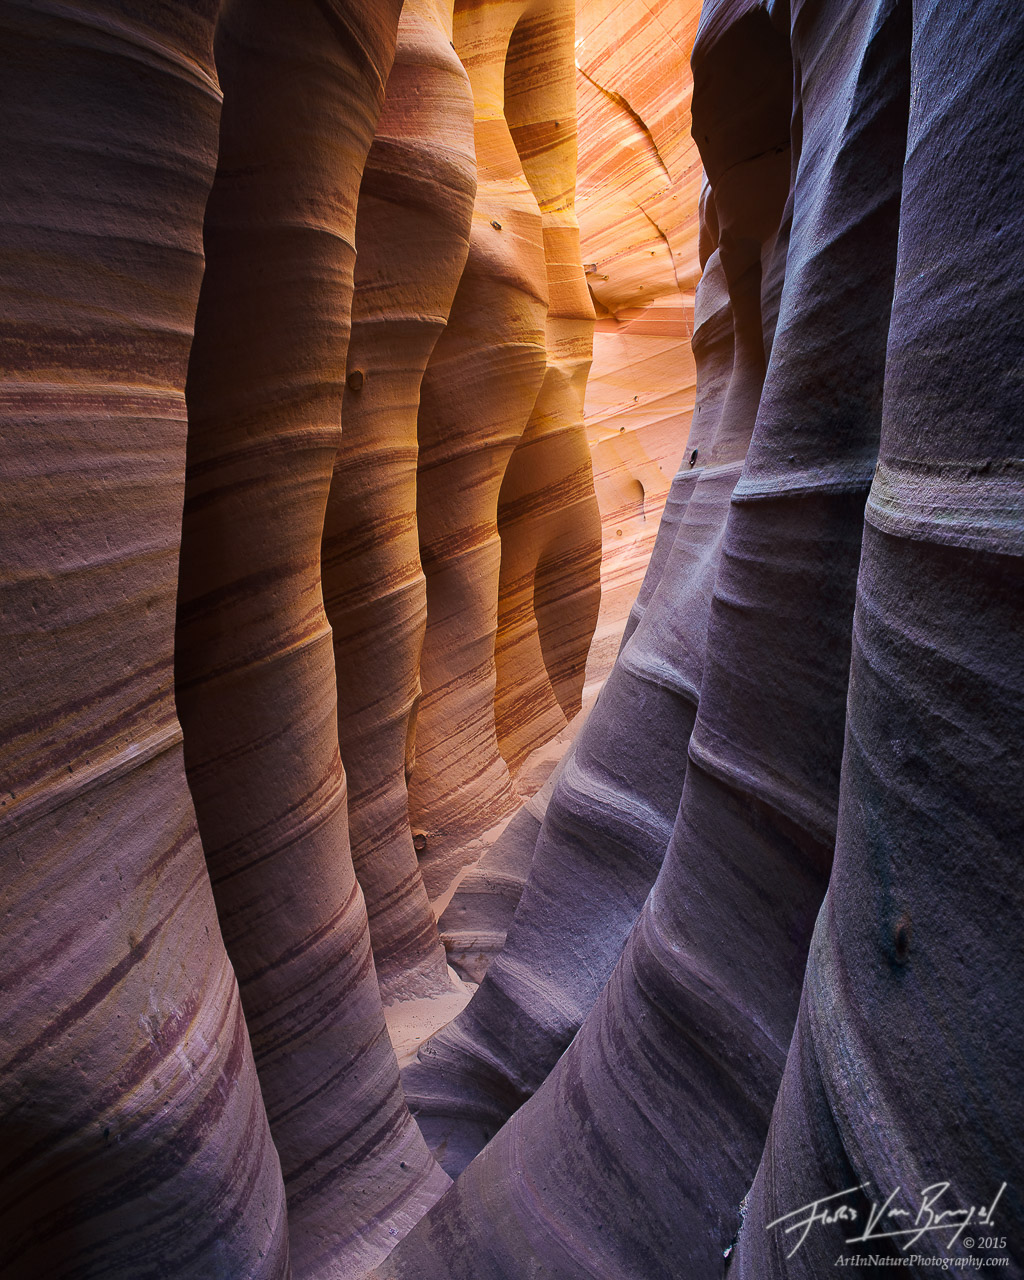 Smooth striped walls of a small slot canyon (Zebra Canyon) in Utah's Escalante National Monument are bathed in vibrant reflected...